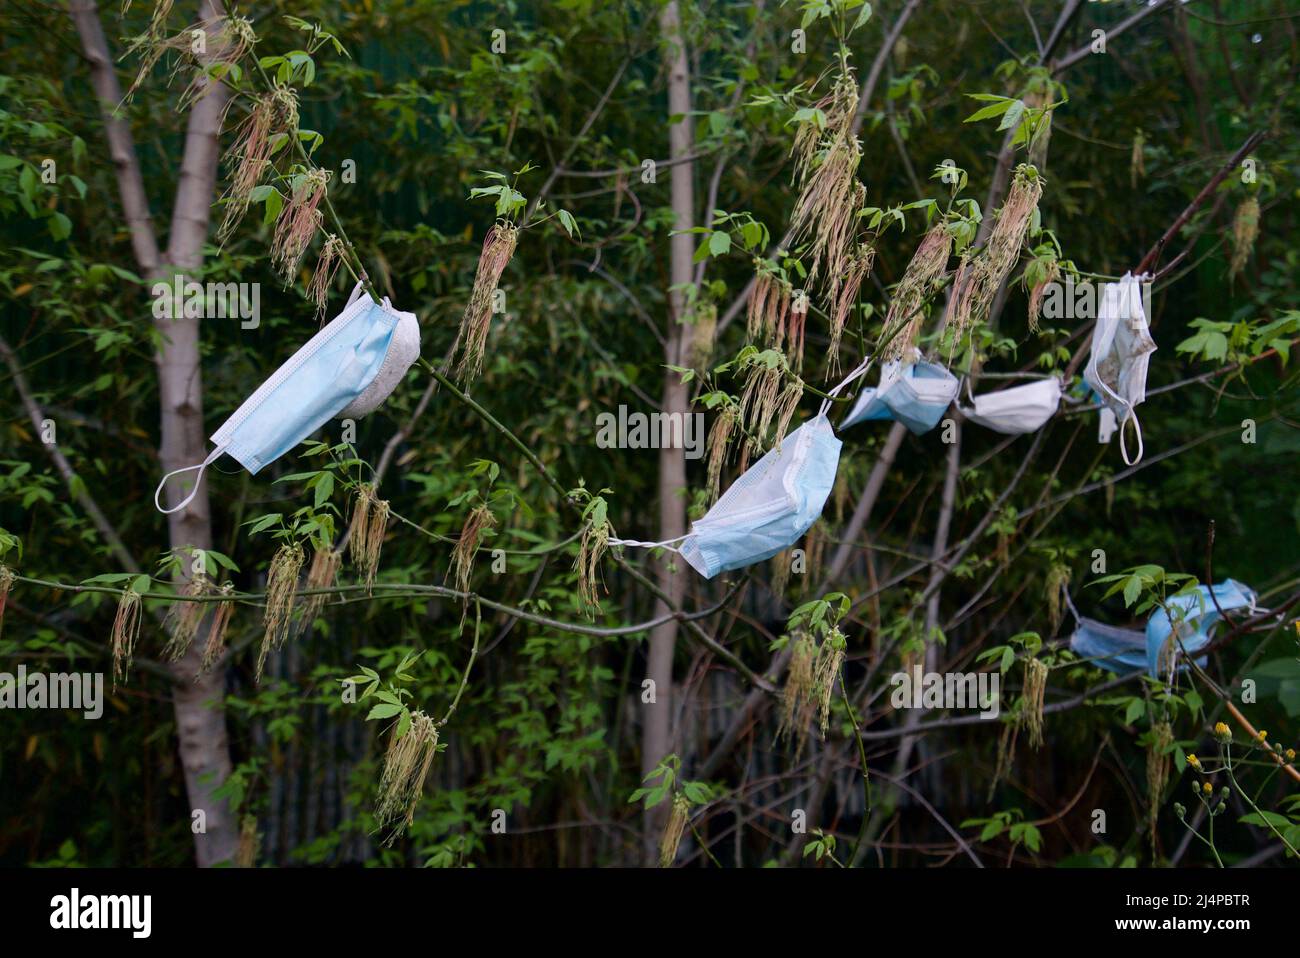 Dozens of PPE face masks from the Covid-19/Coronavirus pandemic hanging in trees and bushes, as covid waste generates litter. Pollution and covid. Stock Photo